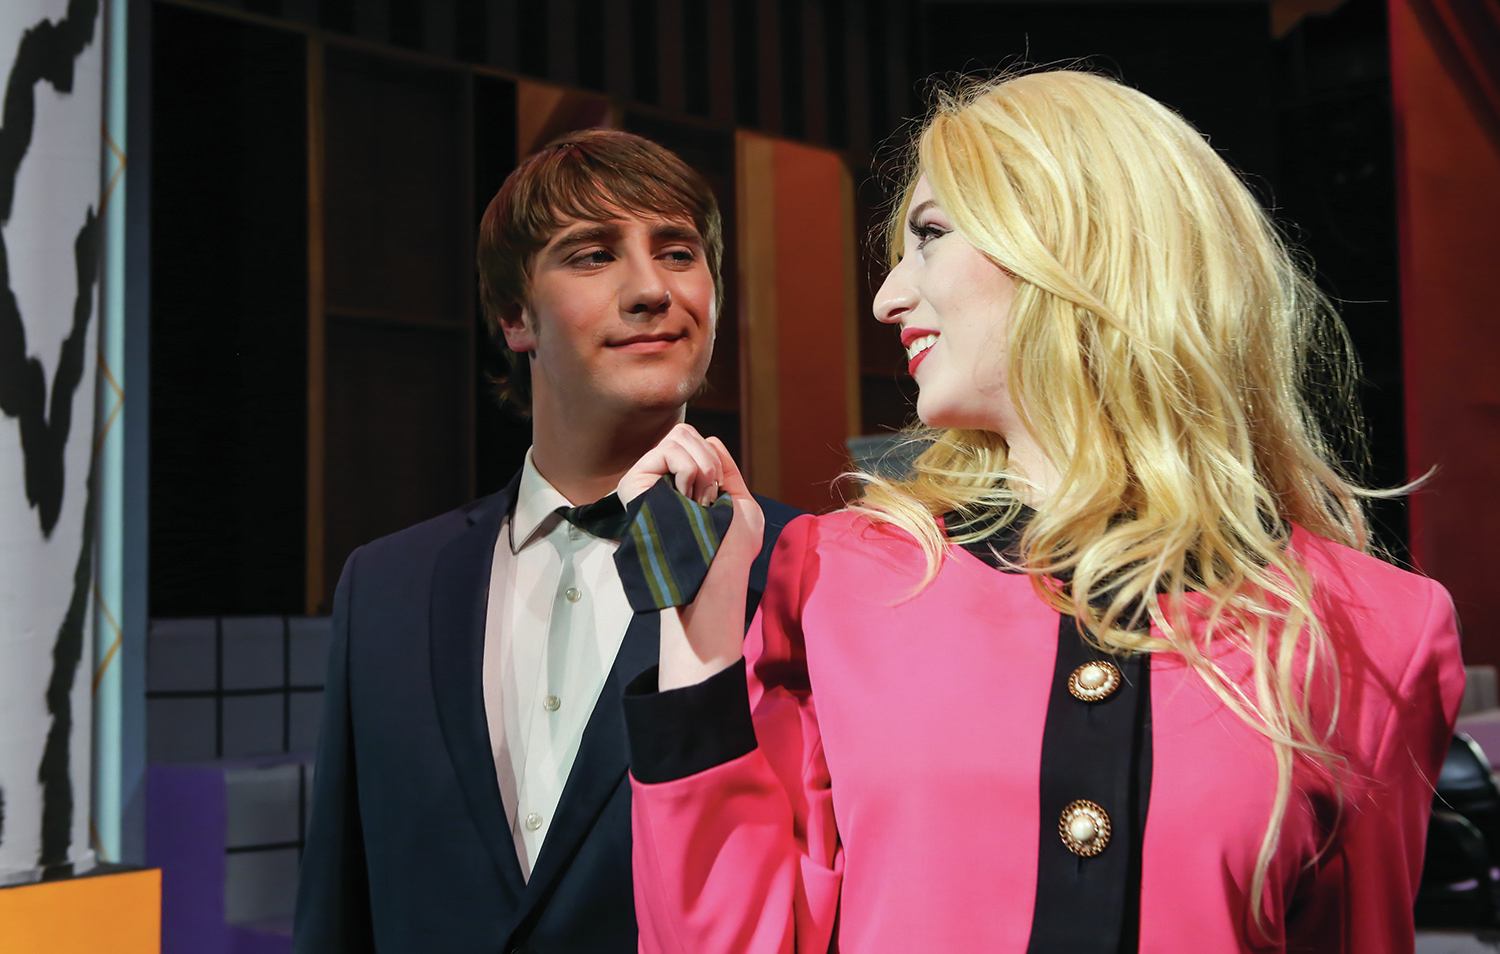 ON STAGE - Maggie Chisholm as Elle Woods and Thomas Zima as Emmett rehearse a scene from the Red Deer College production of Legally Blonde - The Musical. Performances run through to Feb. 18th on the Arts Centre’s mainstage.